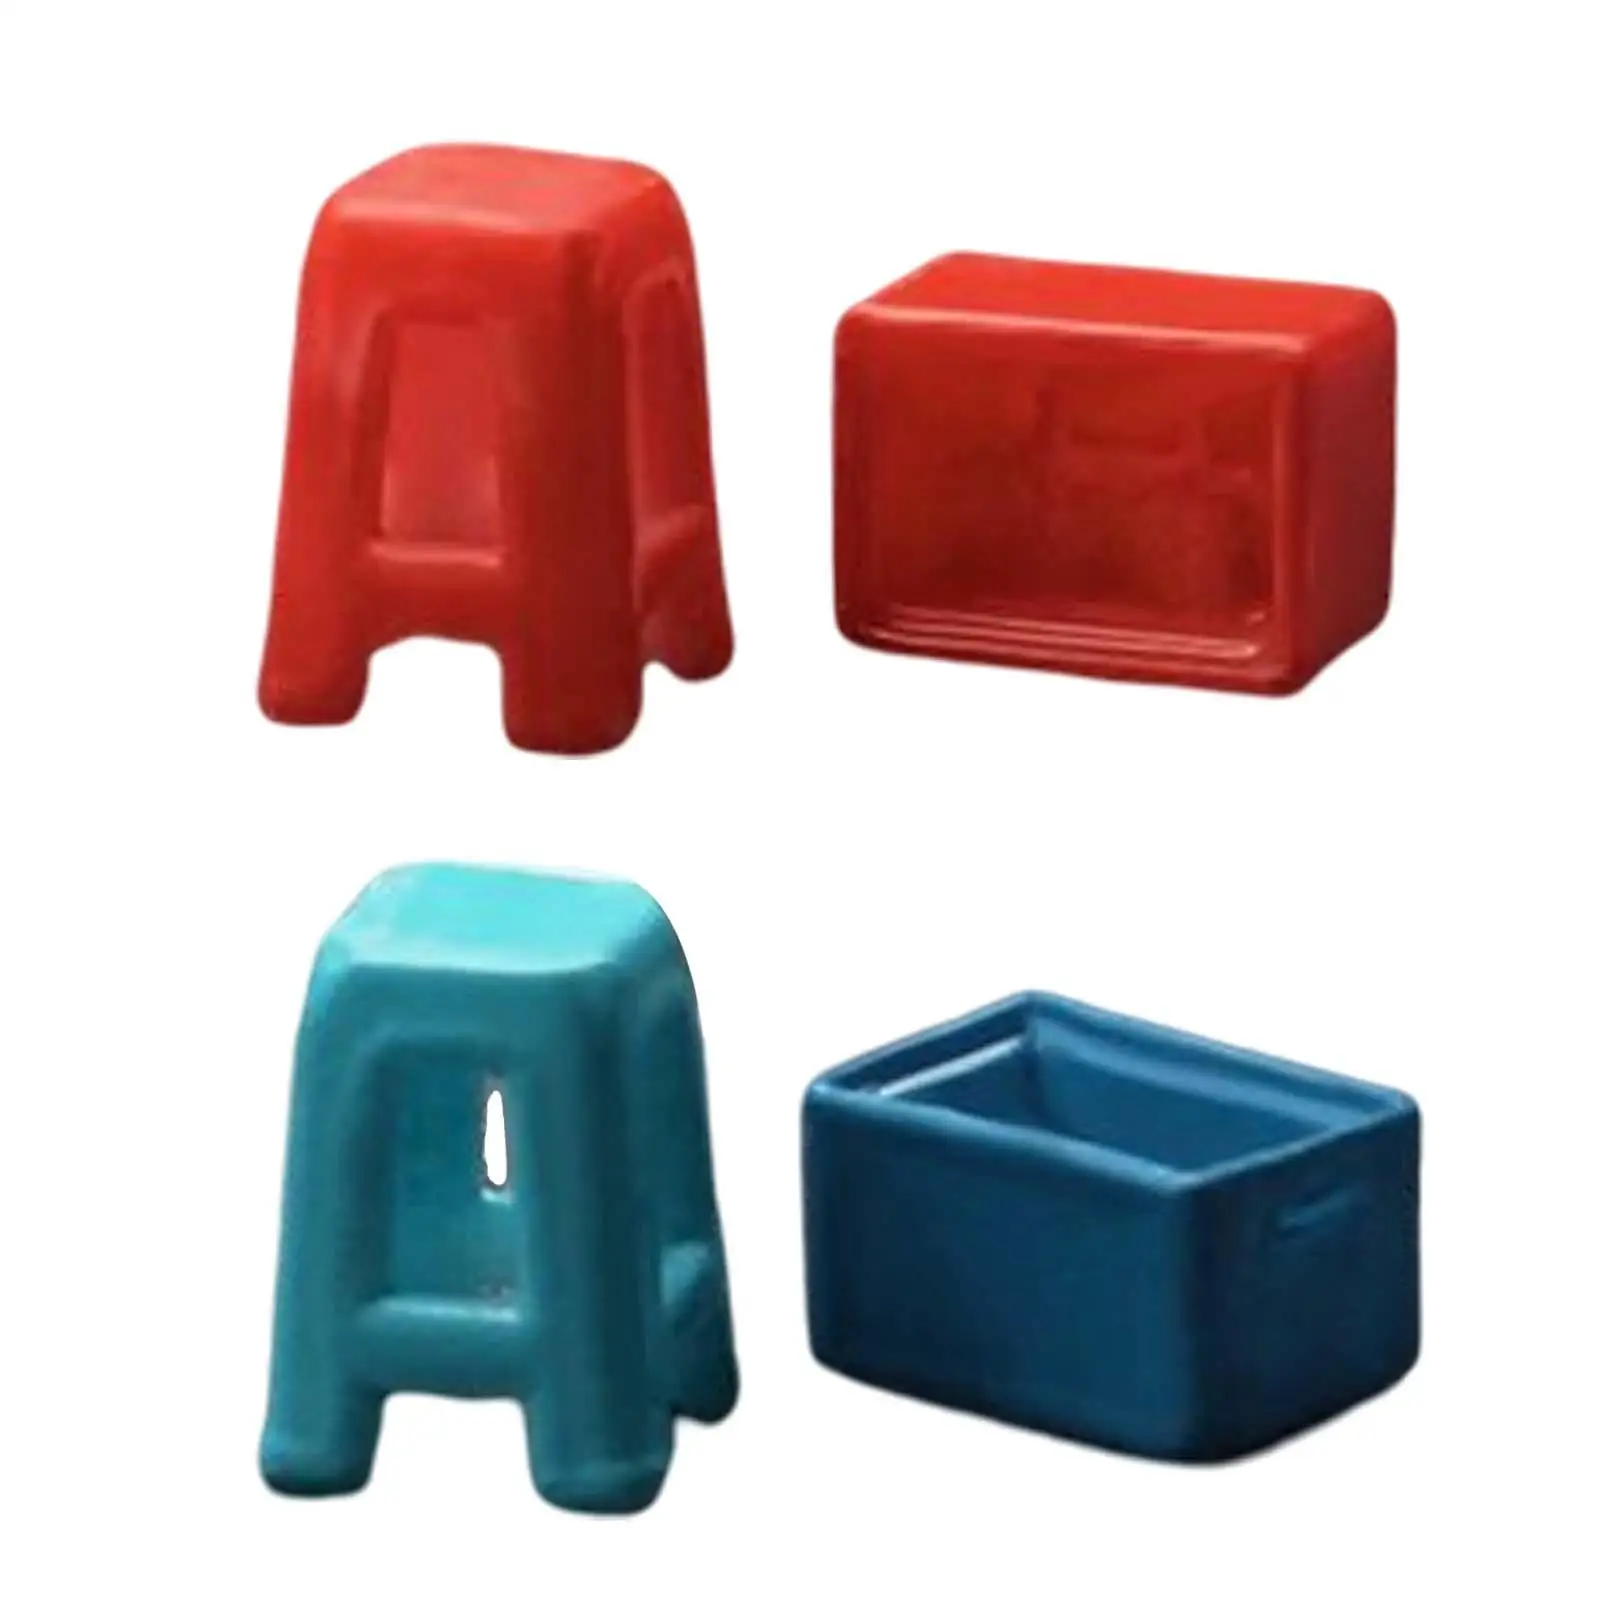 1/64 Scale Chair Model Resin for Miniature Scenes Decor Photography Props